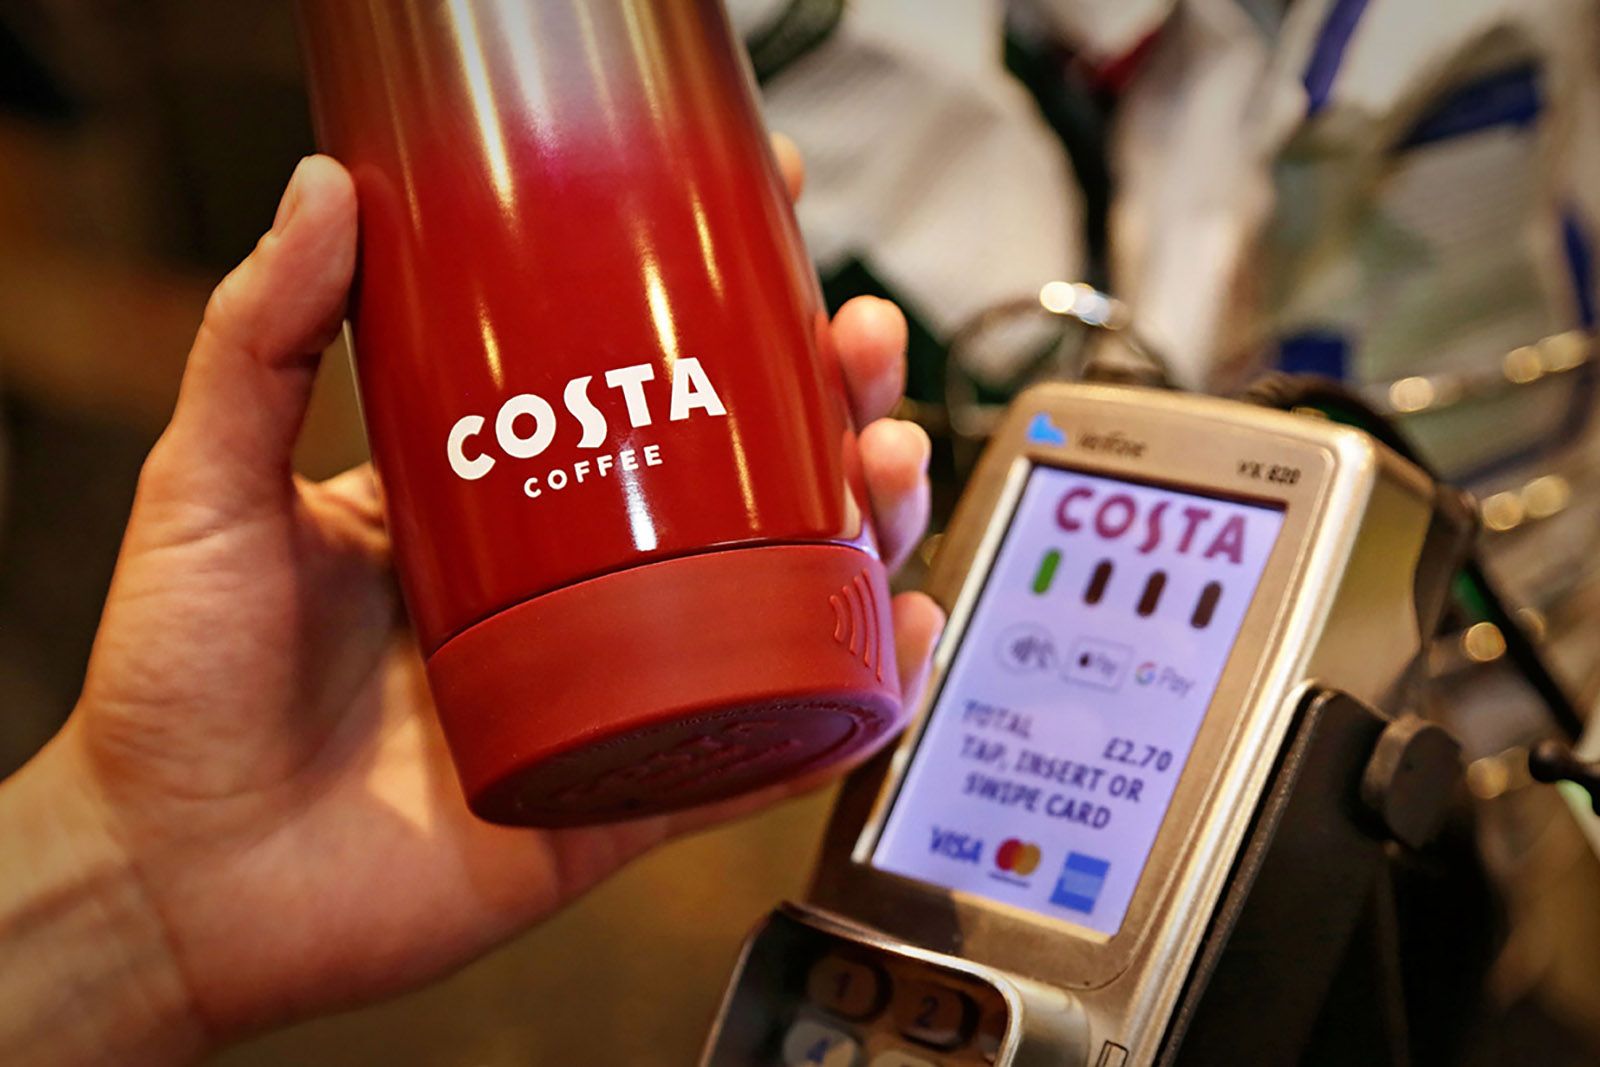 Costa Clever Cup will hold your coffee refills and pay for them through contactless too image 1